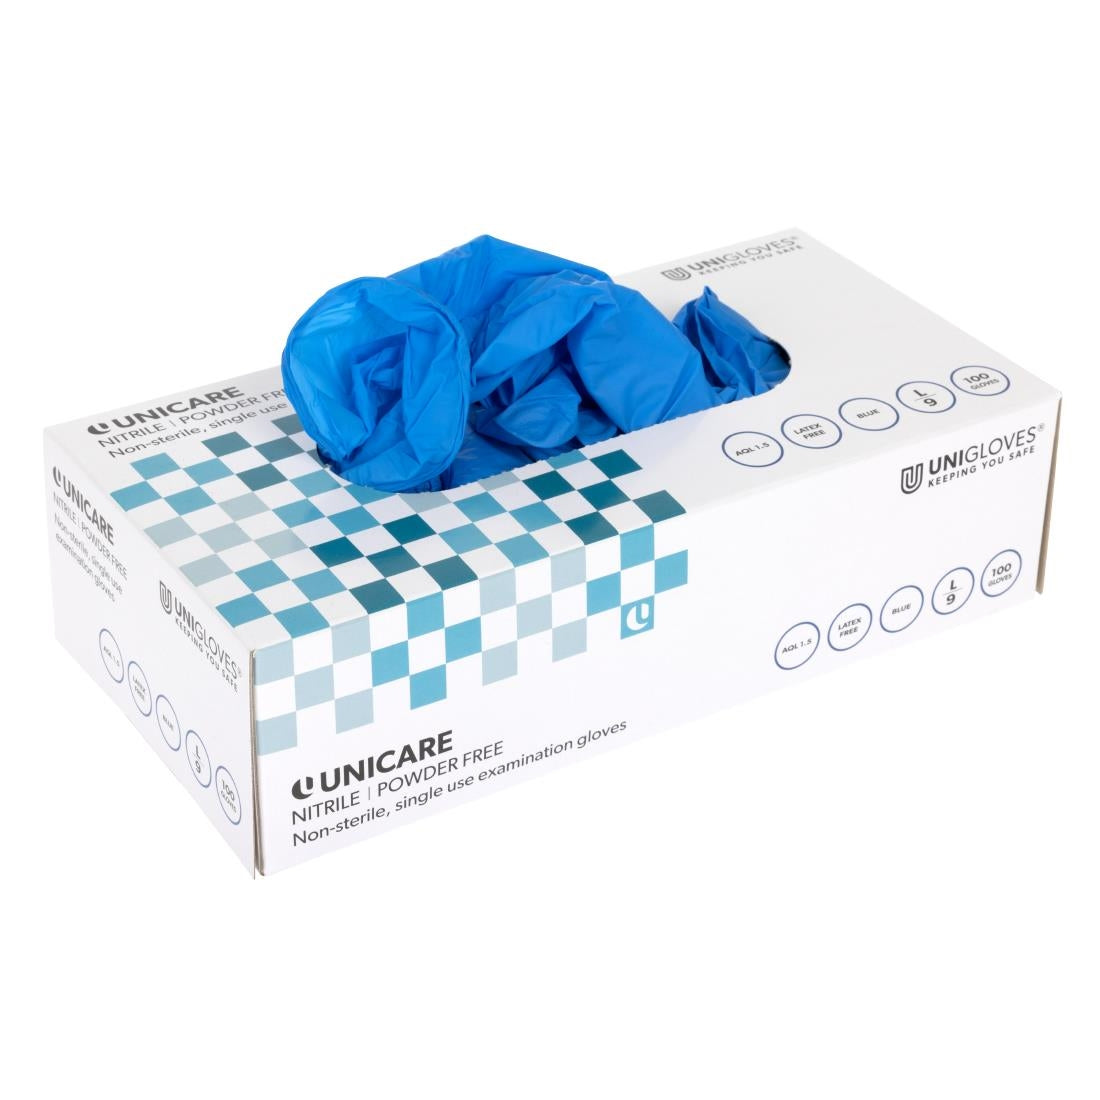 Y478-S Powder-Free Nitrile Gloves S (Pack of 100)